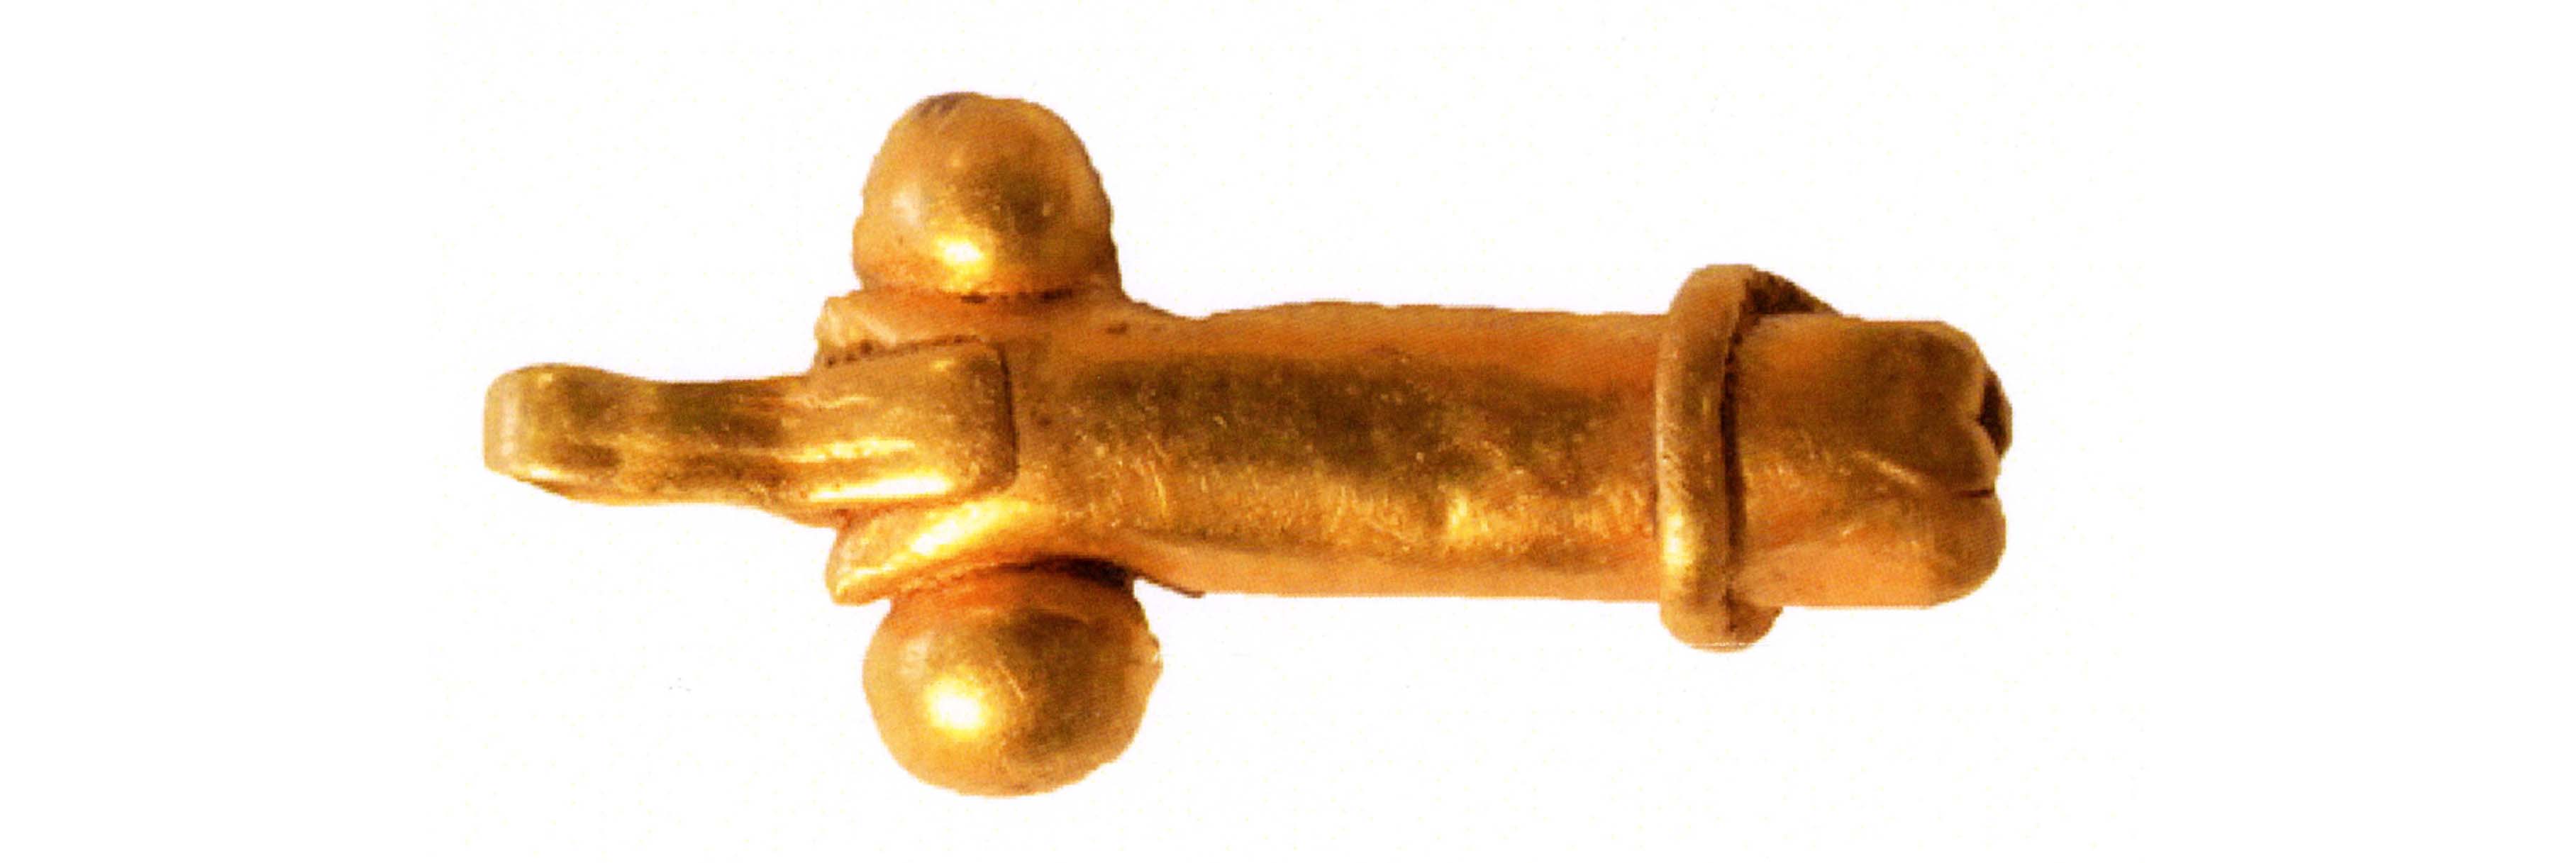 Solid gold Roman pendant shaped like a penis discovered